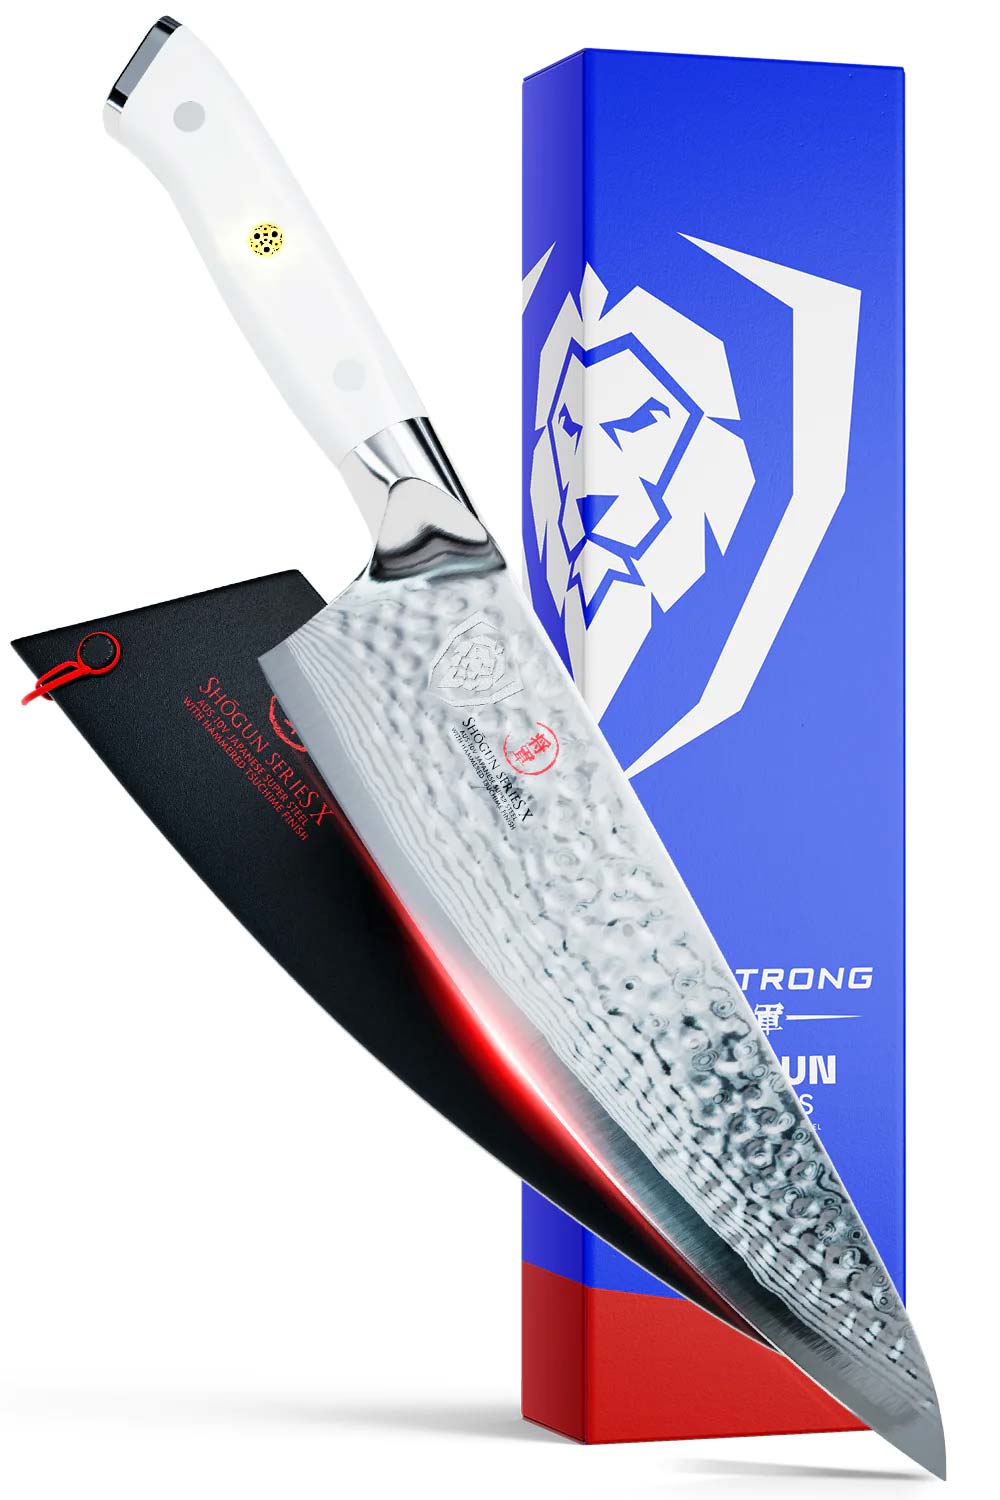 Dalstrong shogun series 8 inch chef knife with white handle in front of it's beautiful packaging.